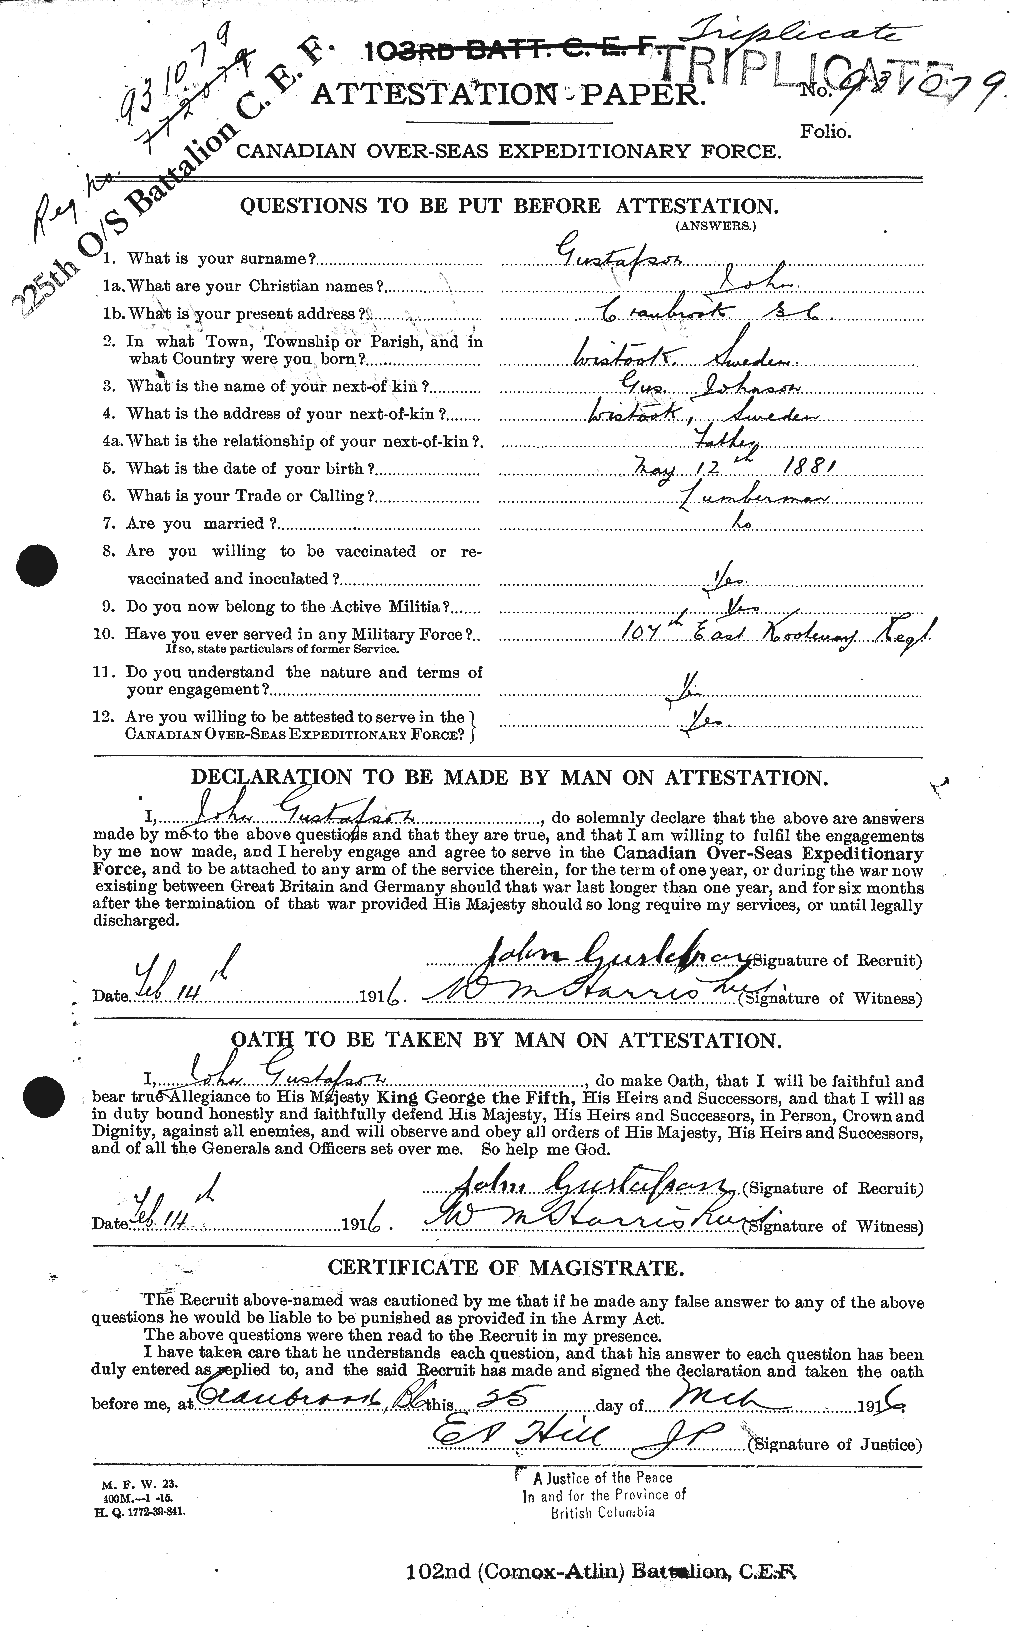 Personnel Records of the First World War - CEF 369996a